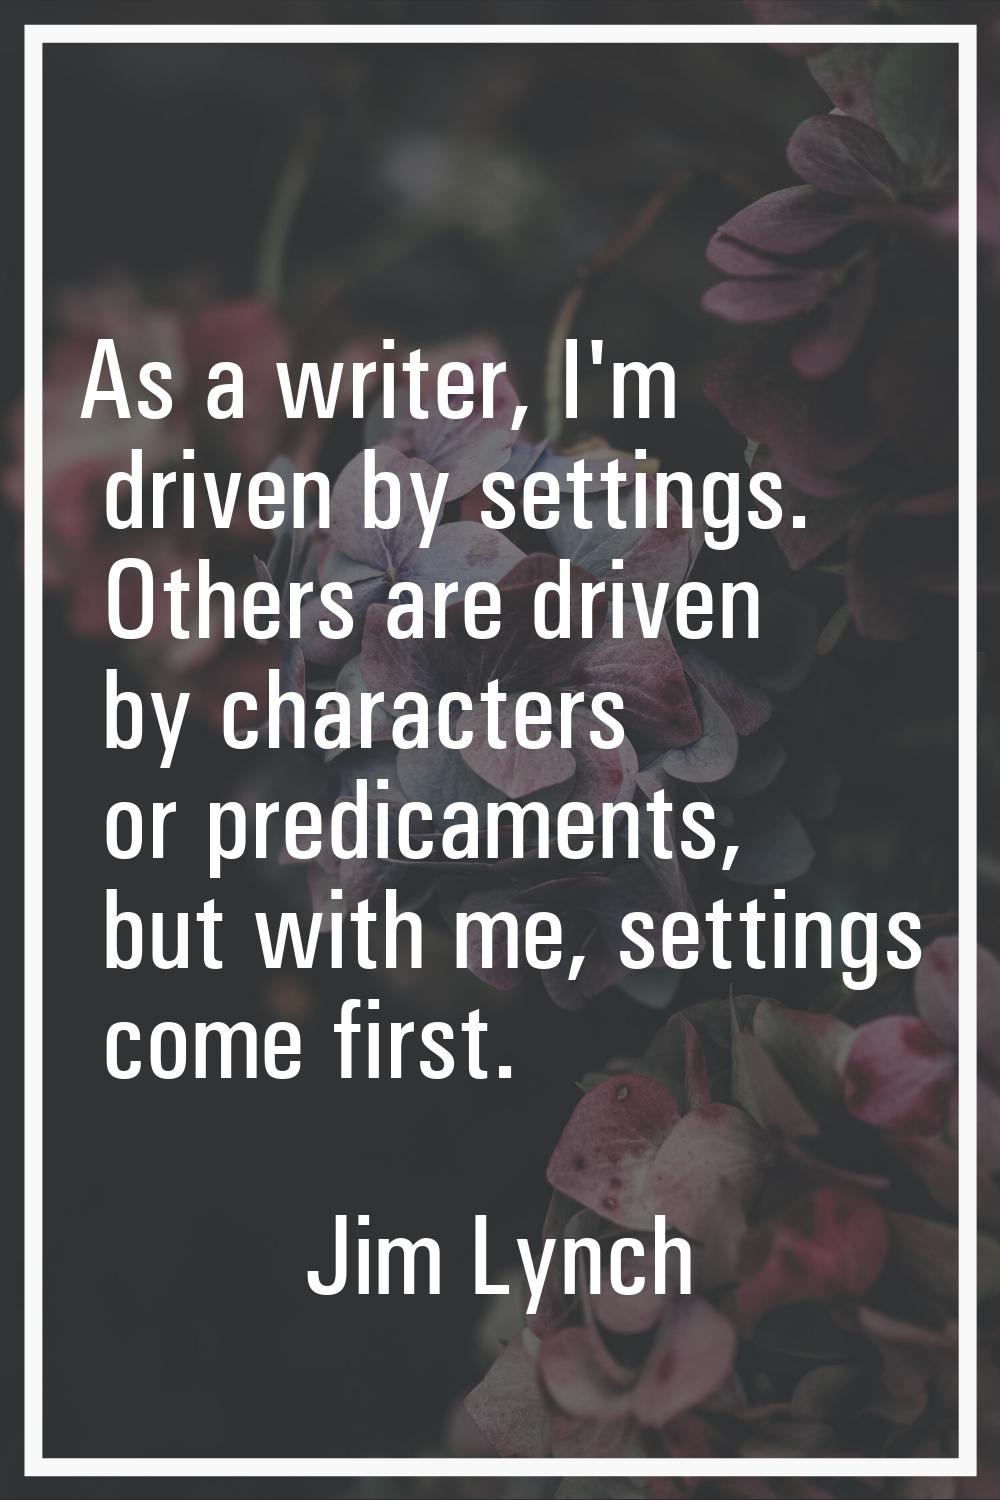 As a writer, I'm driven by settings. Others are driven by characters or predicaments, but with me, 